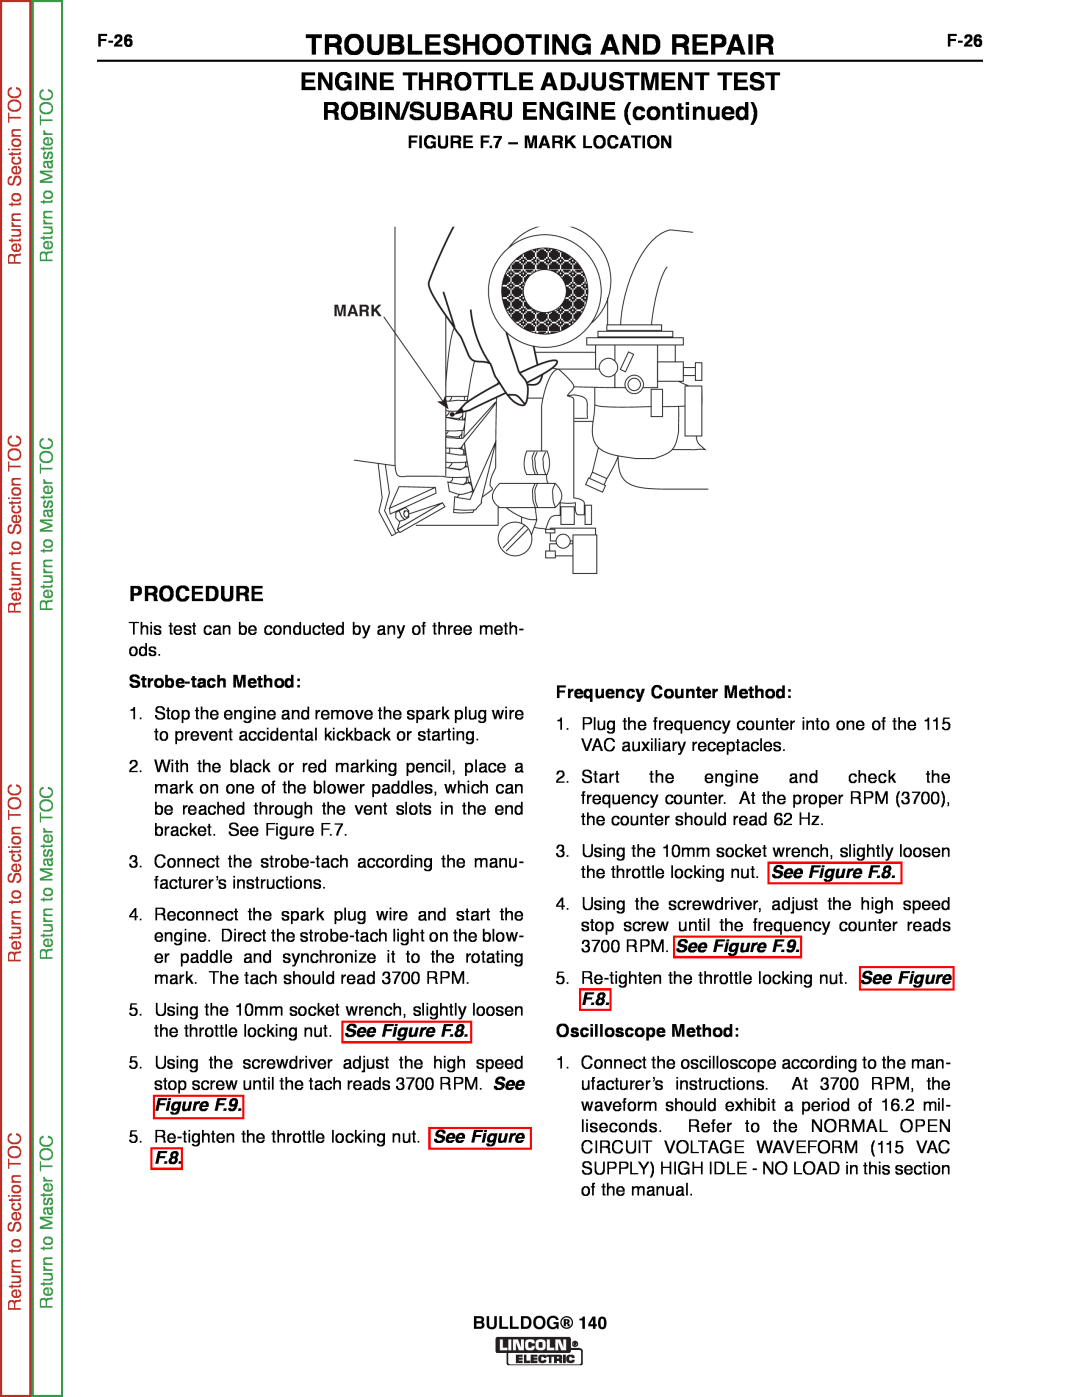 Lincoln Electric SVM208-A ENGINE THROTTLE ADJUSTMENT TEST ROBIN/SUBARU ENGINE continued, Troubleshooting And Repair, F-26 